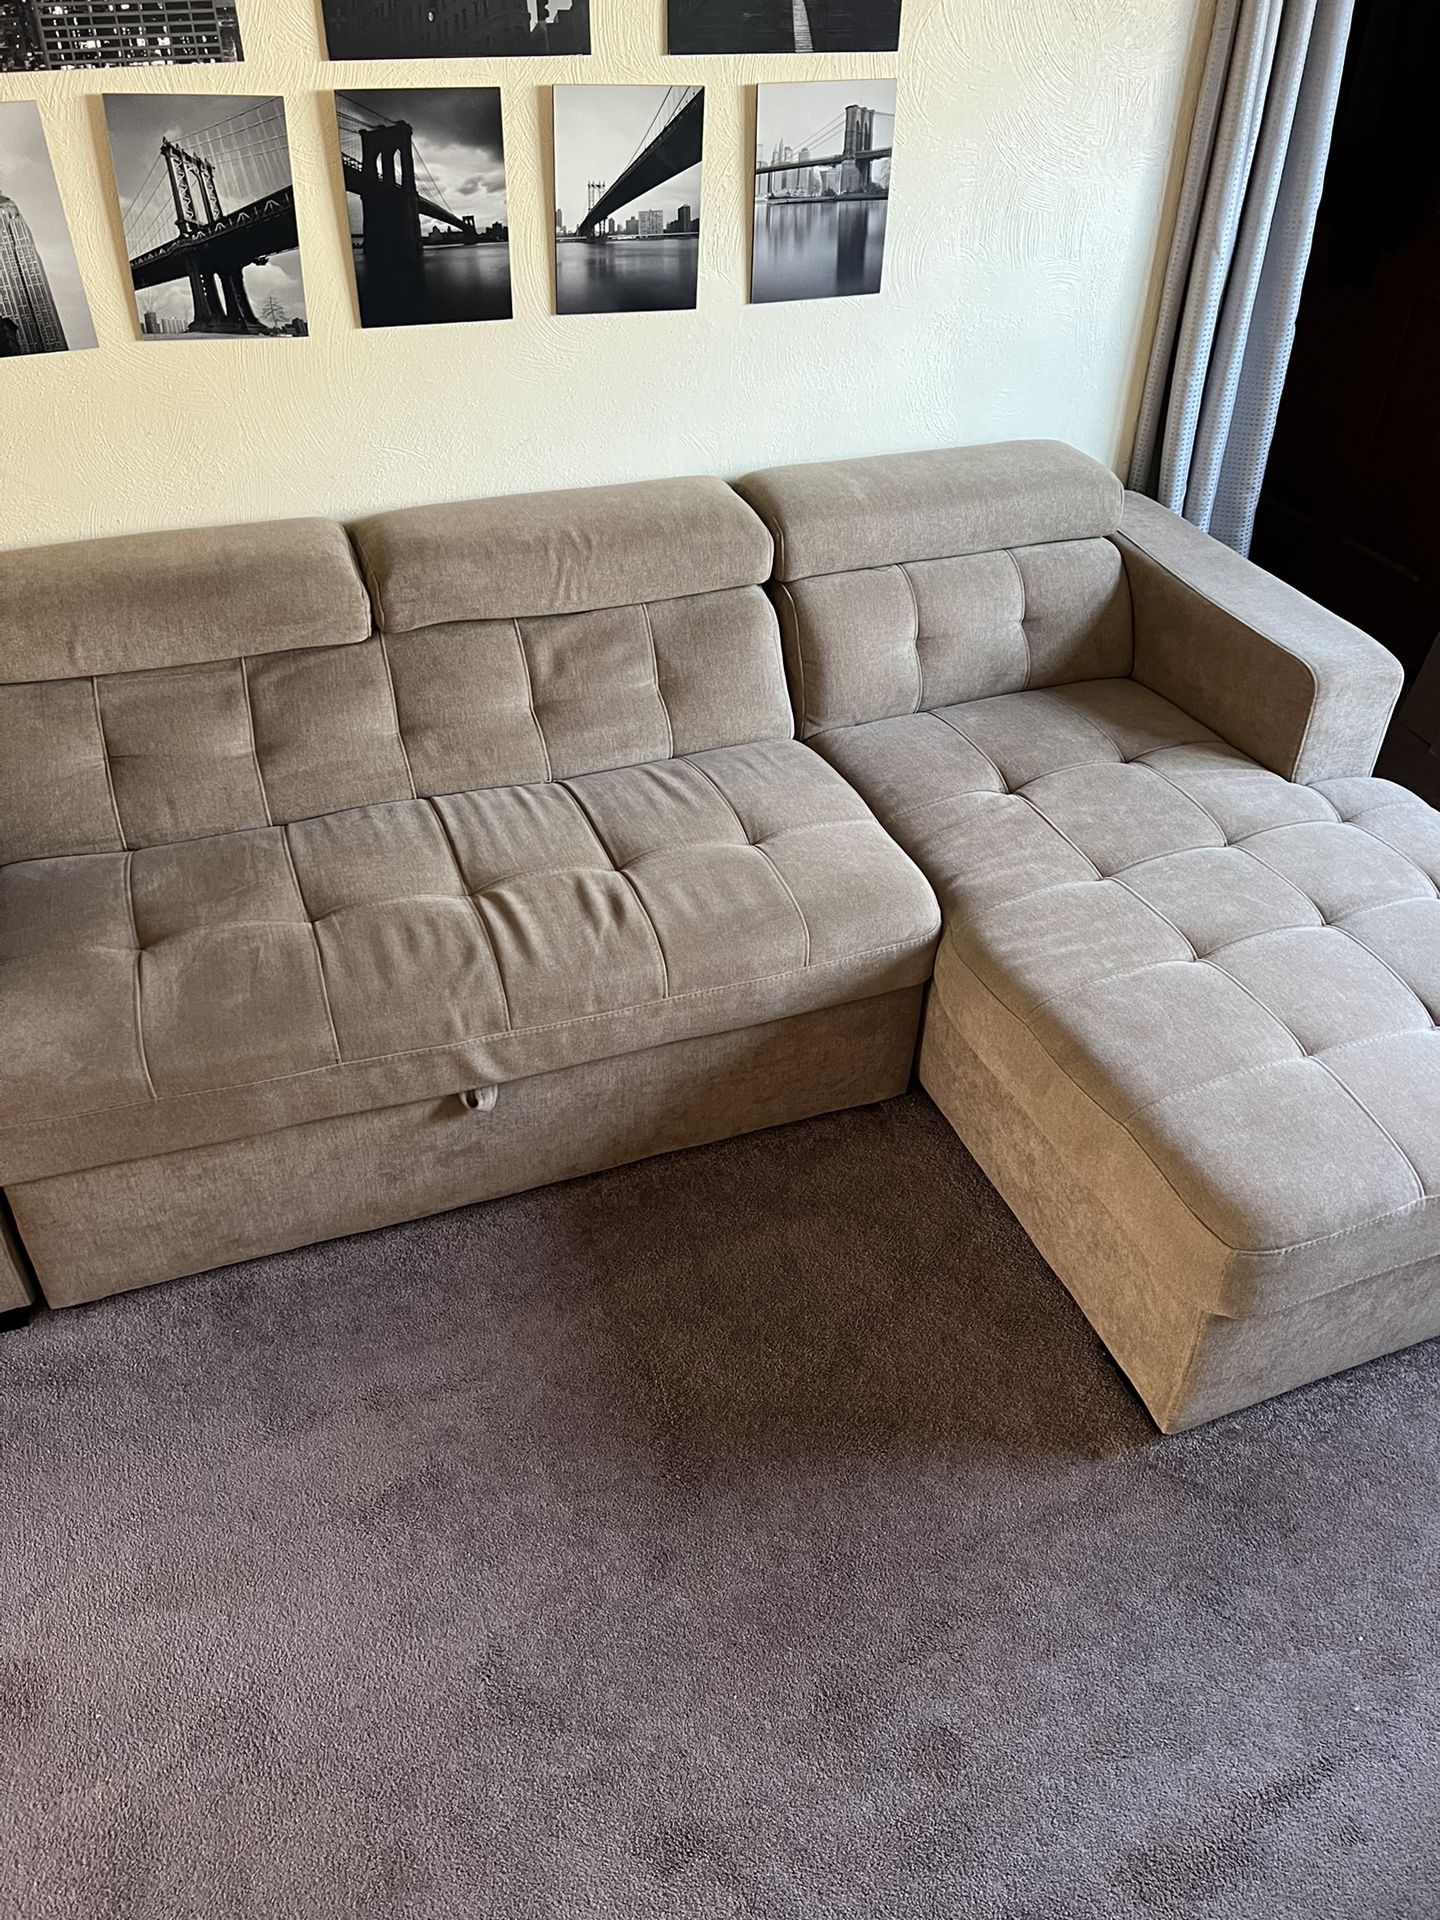 Gently Used Couch $300 OBO